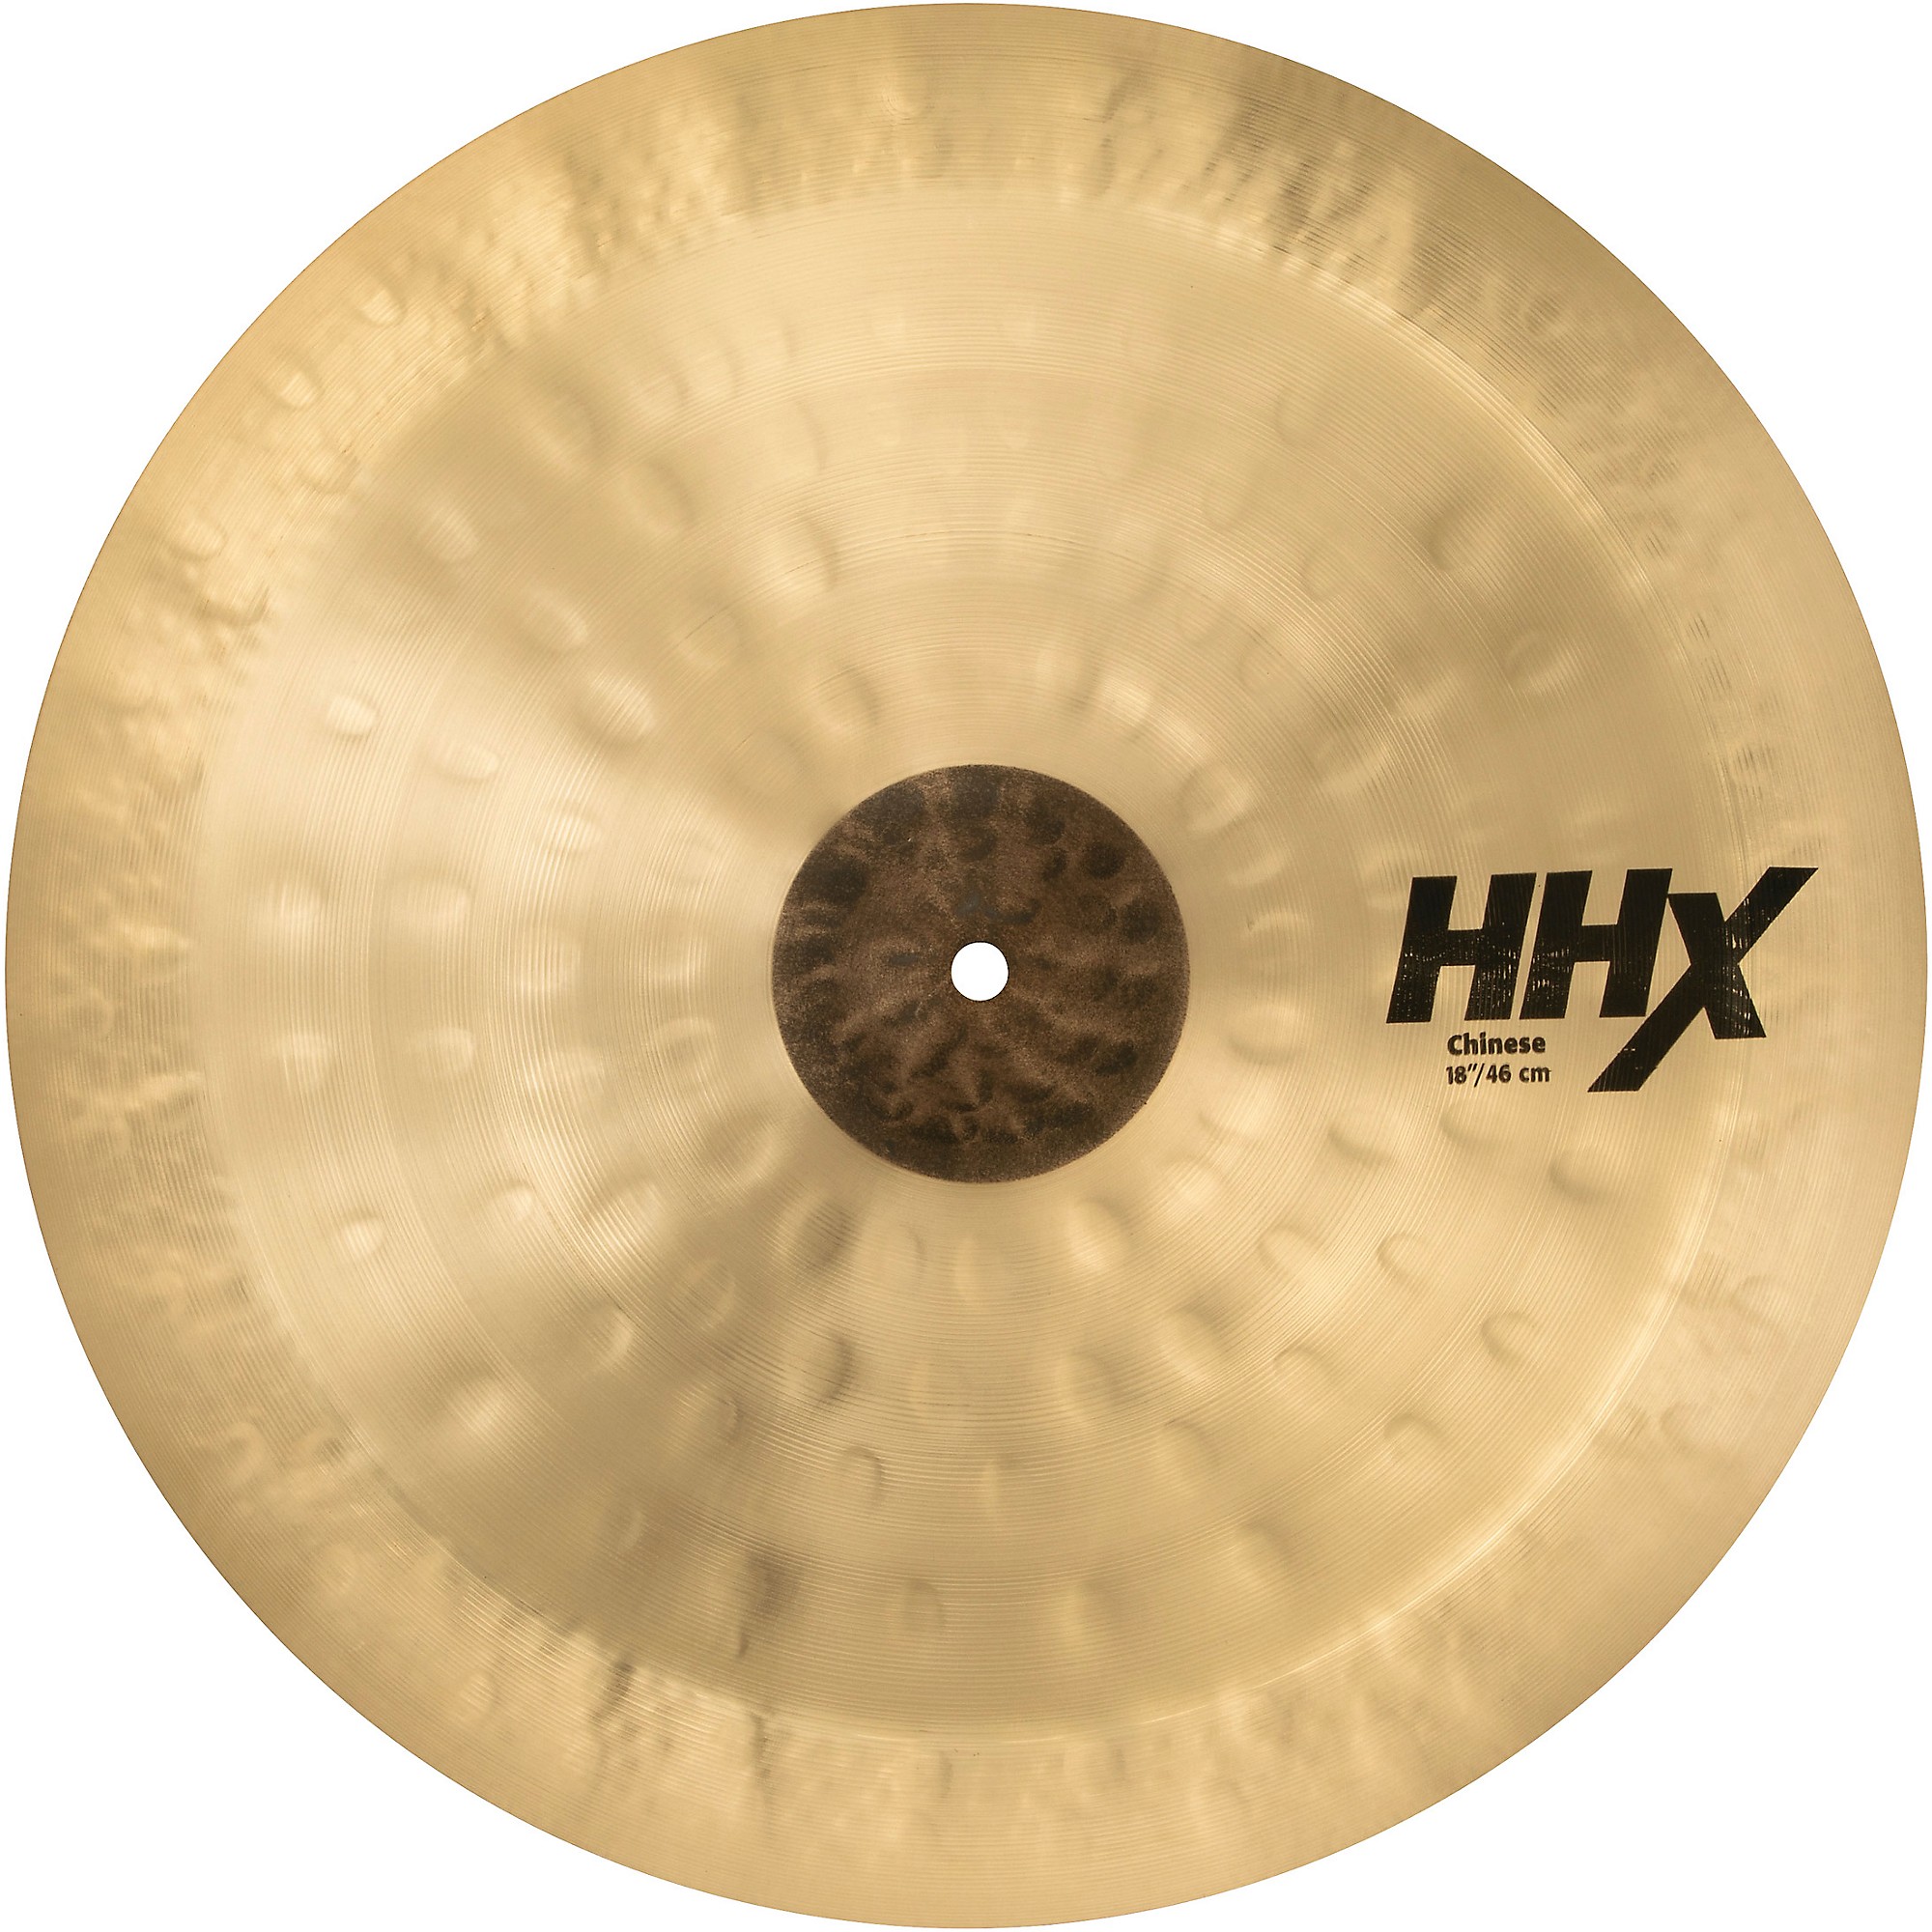 SABIAN HHX Chinese Cymbal 18 in. | Guitar Center